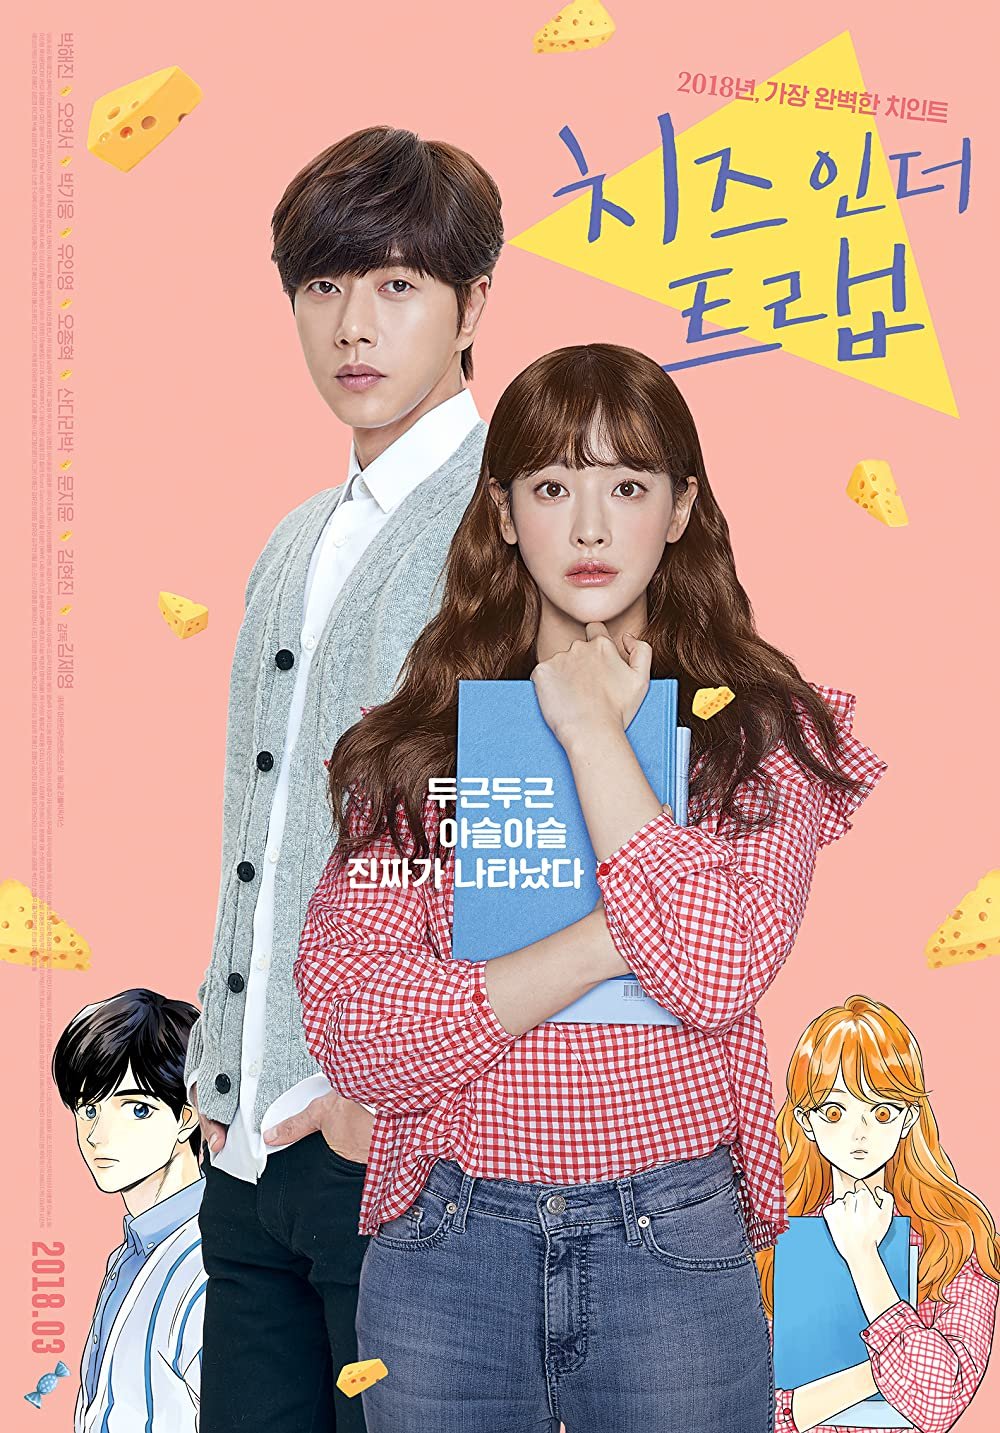 Cheese In The Trap Story Review] Cheese In The Trap (Film) - TheKMeal